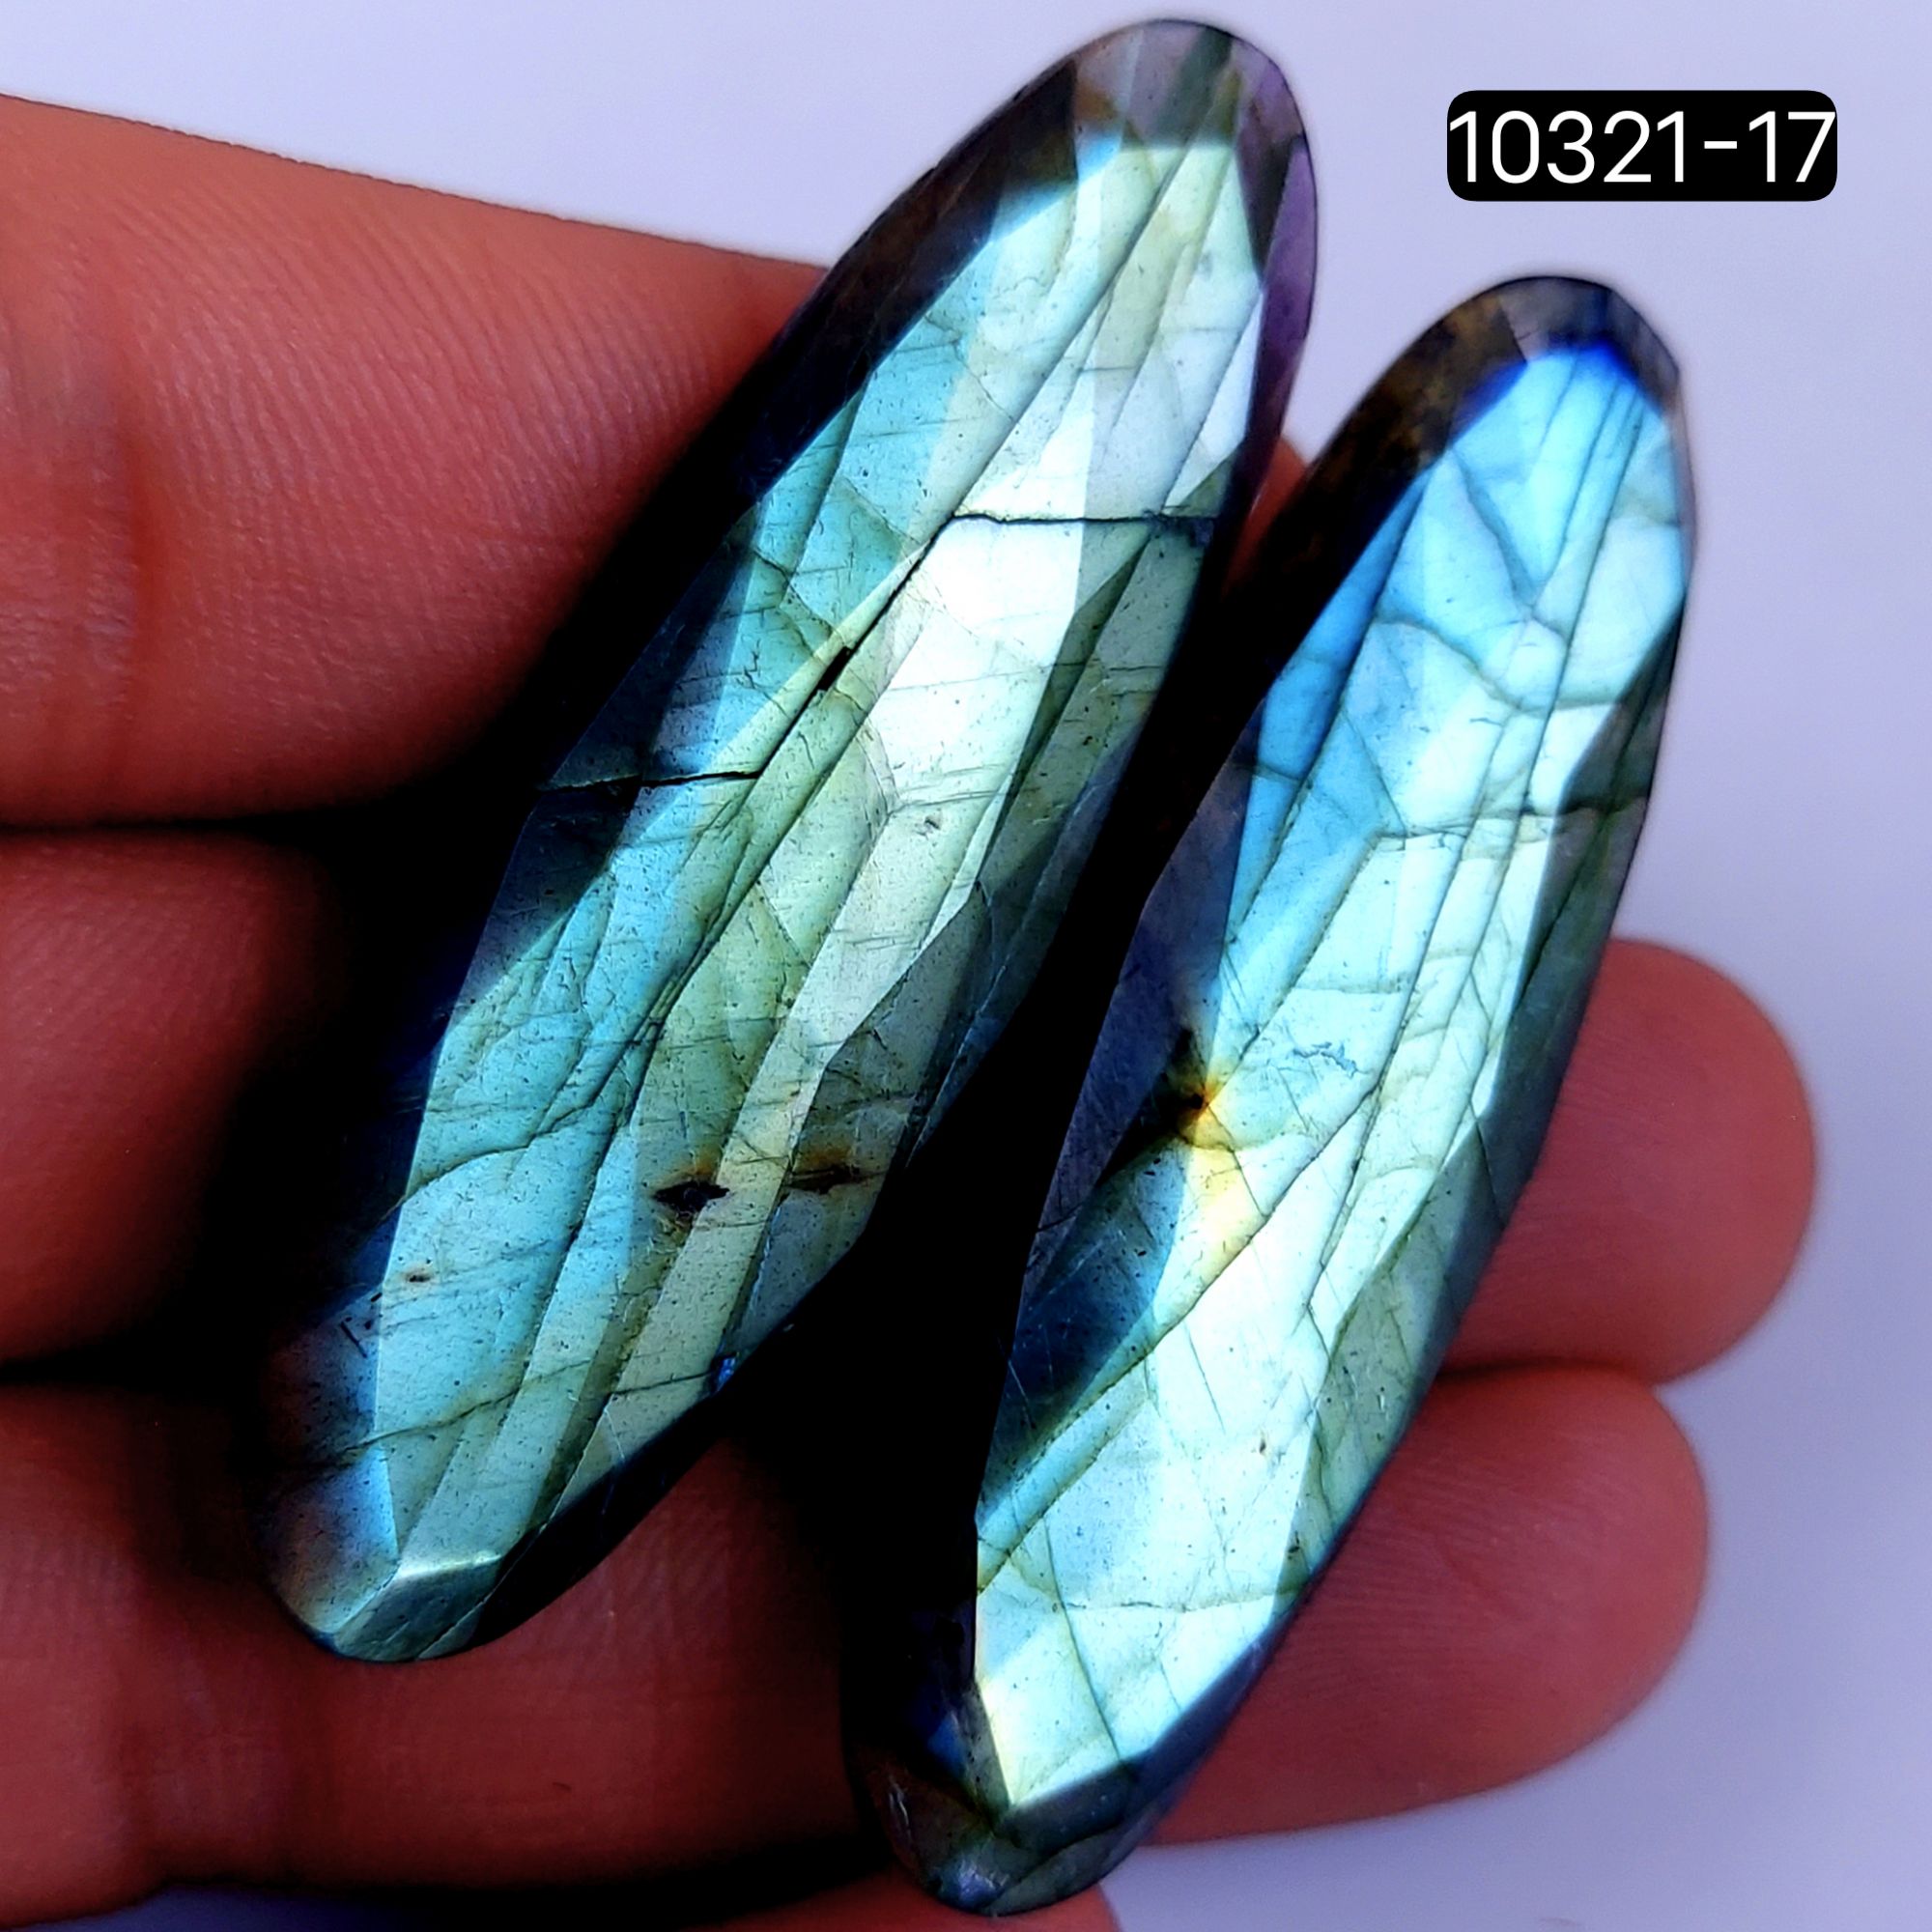 113Cts Natural Labradorite Faceted Cabochon Pair Polished Loose Gemstone Flat Back Multi Jewelry Making Crystal  55x17mm #10321-17